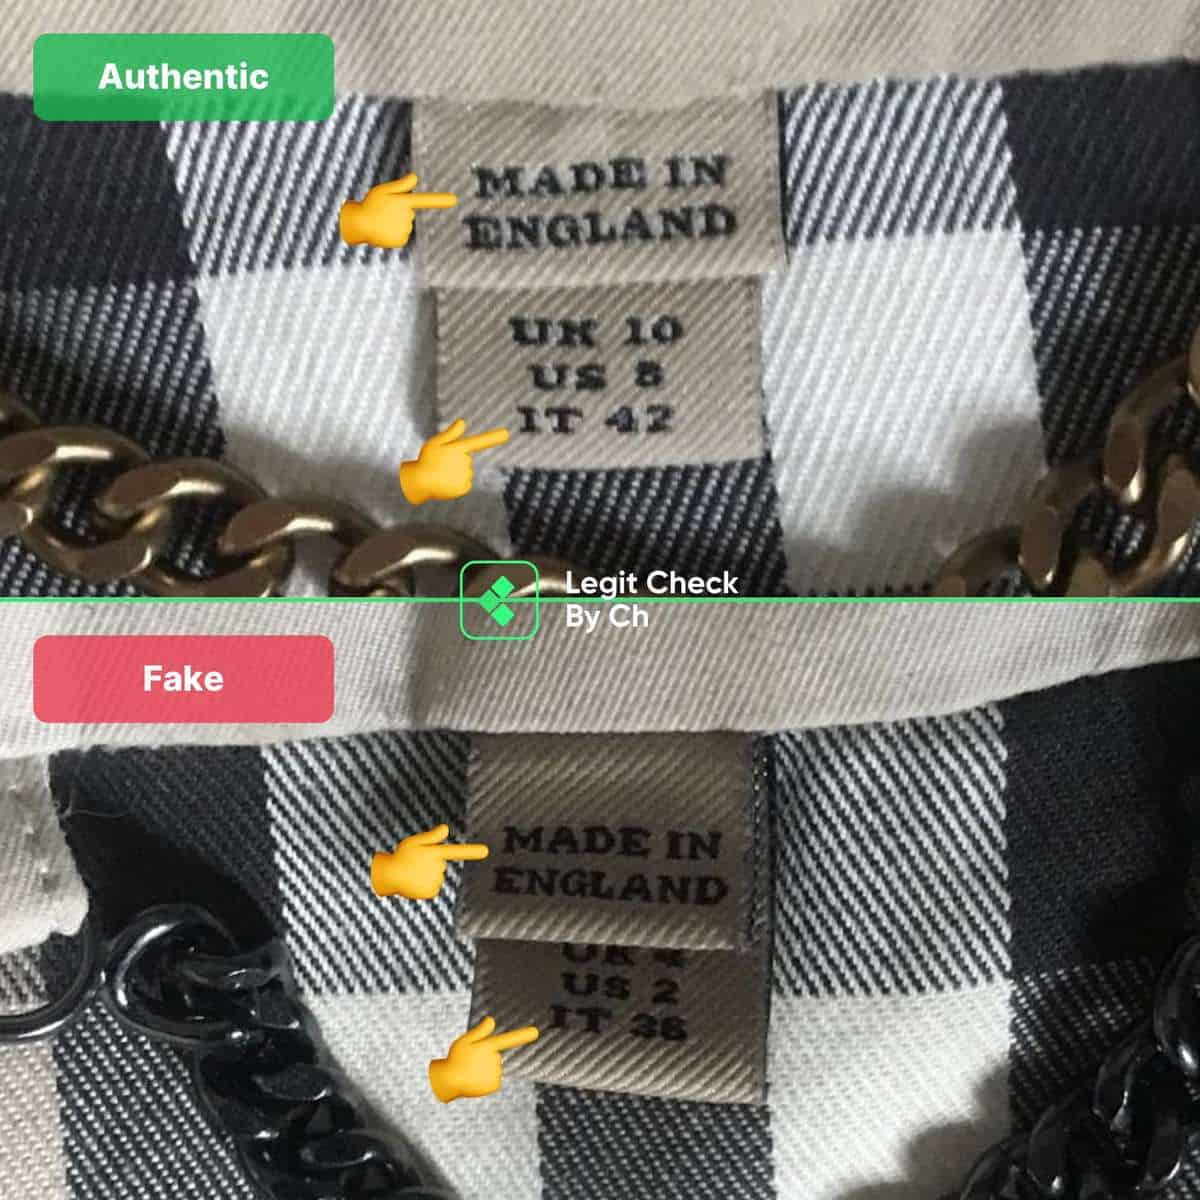 Drik vand Gå ud Vice How To Spot Fake Burberry Coats In 2021 - Fake Vs Real Burberry Trench Coat  Guide - Legit Check By Ch